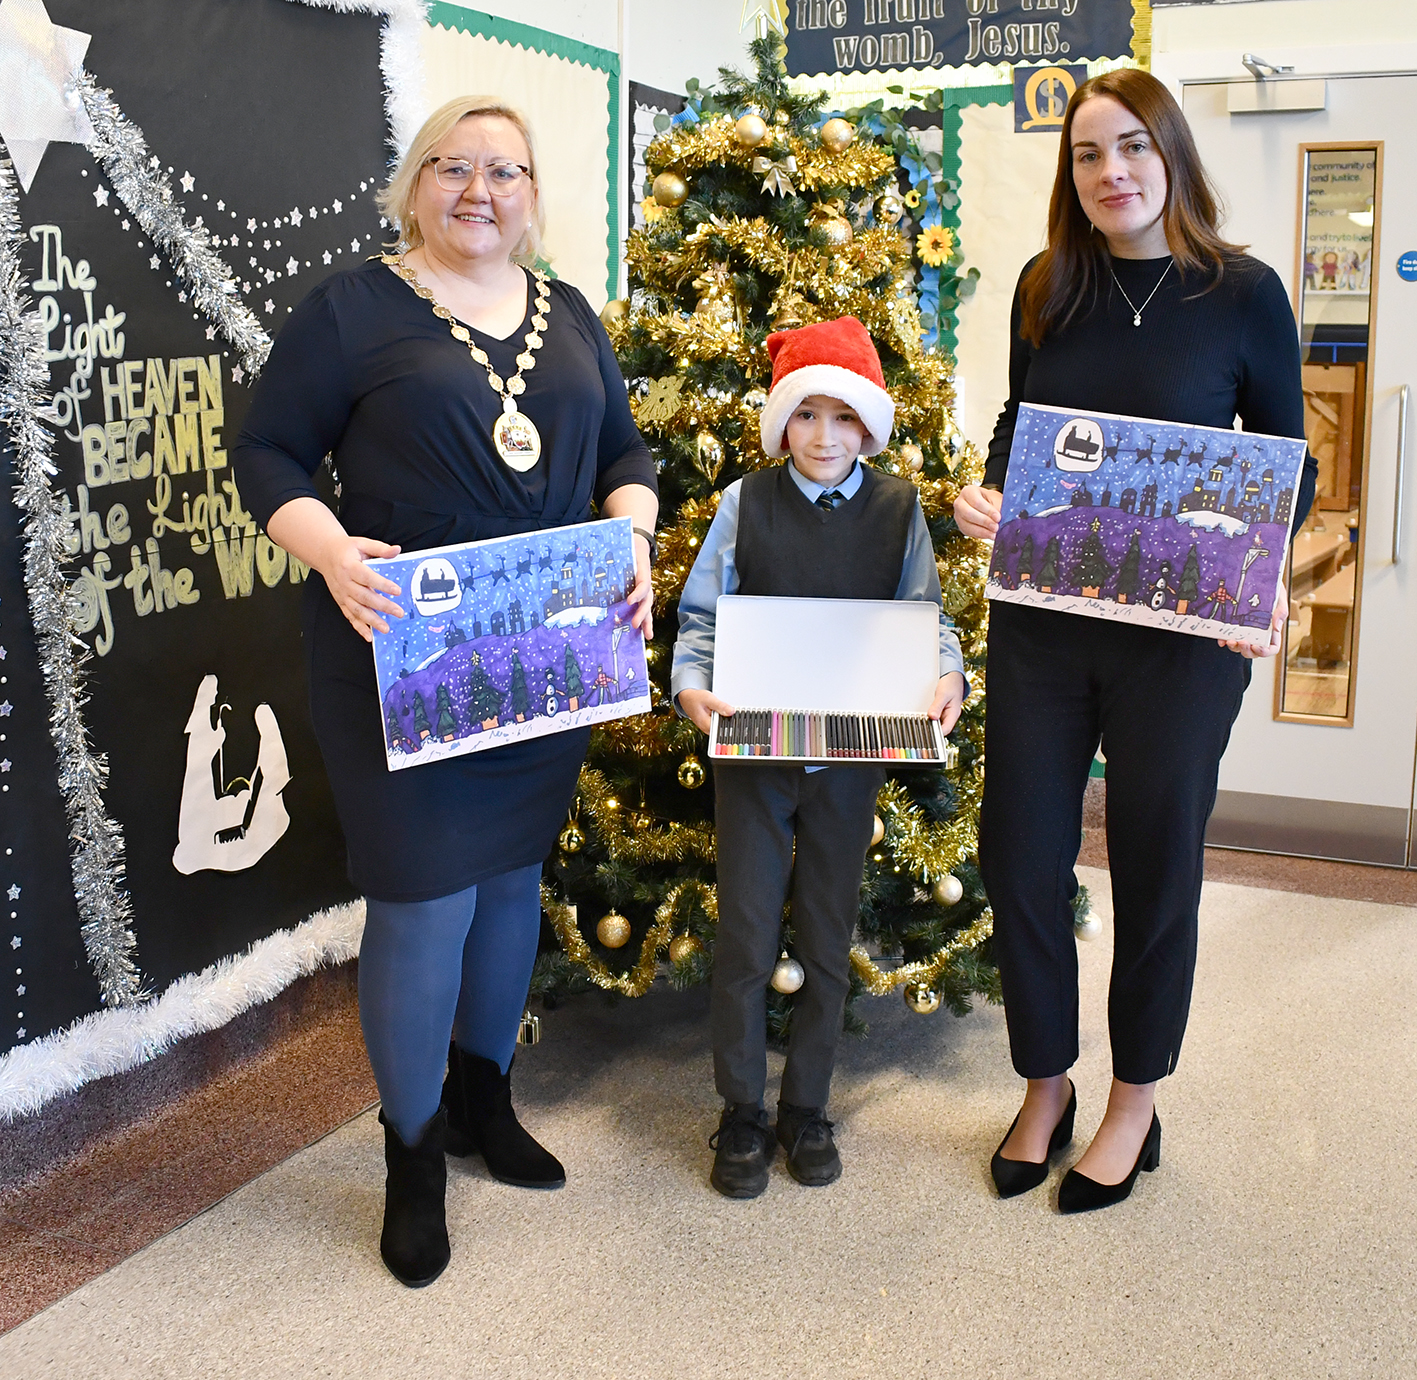 Anthony with Provost and Deputy Provost holding his winning Christmas entry